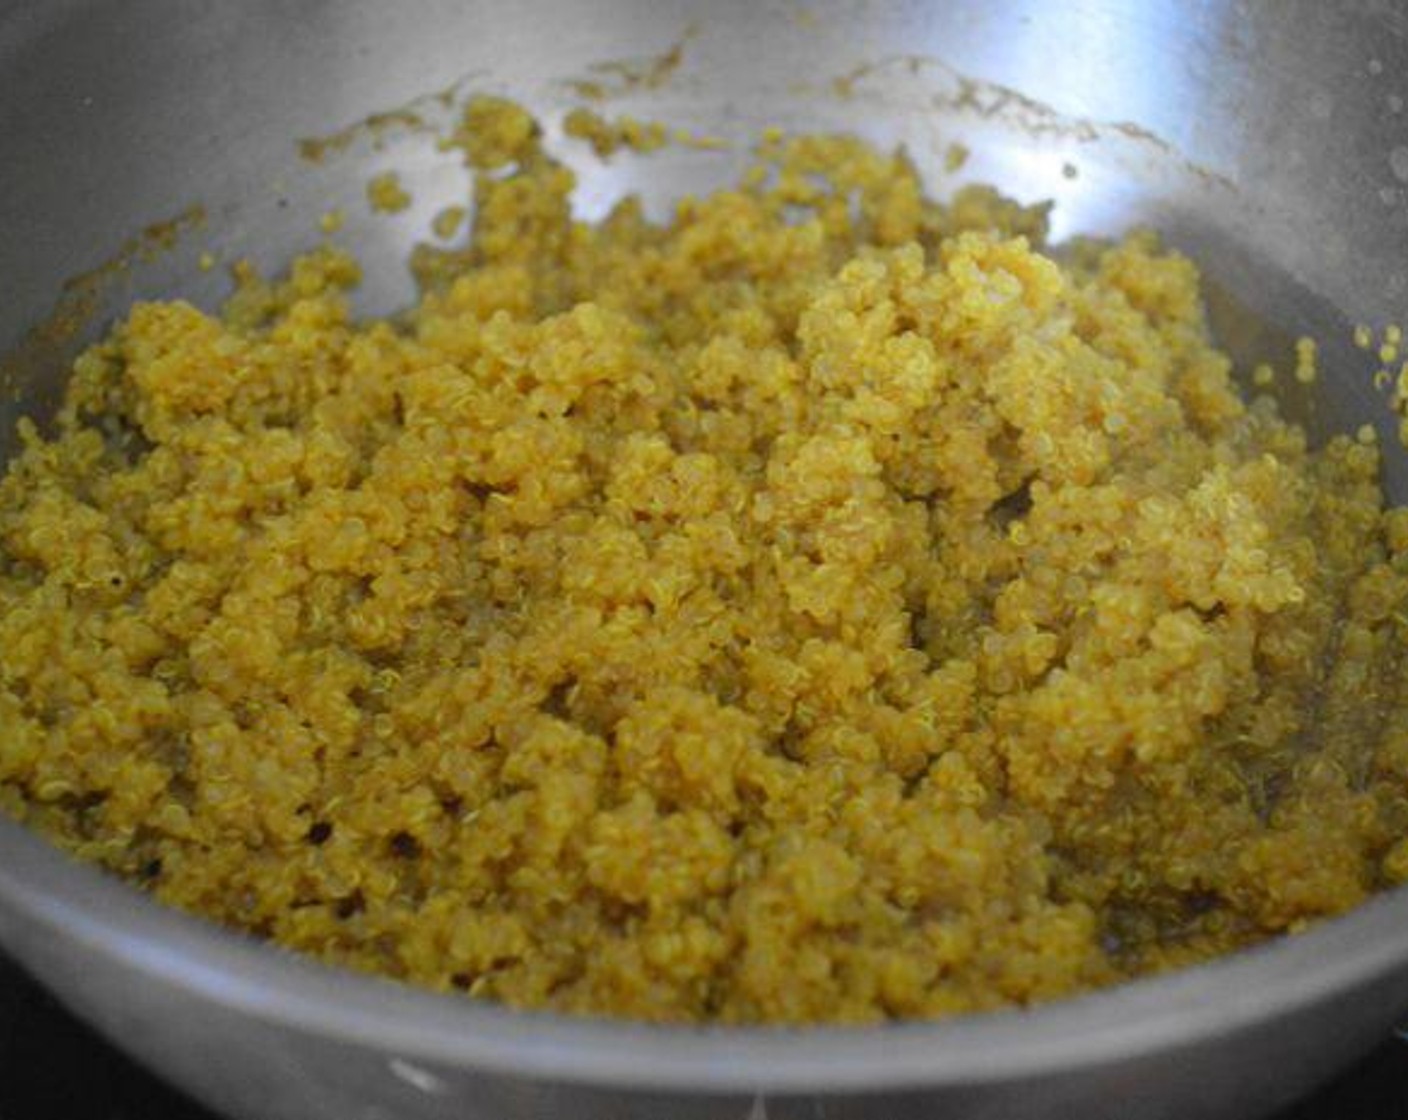 step 4 Once the stock is boiling, pour the Quinoa (1 cup) into it and give it a stir. Cover the pot and turn the heat to low. Let the quinoa cook for 12-15 minutes, until the liquid is all absorbed and it is tender.